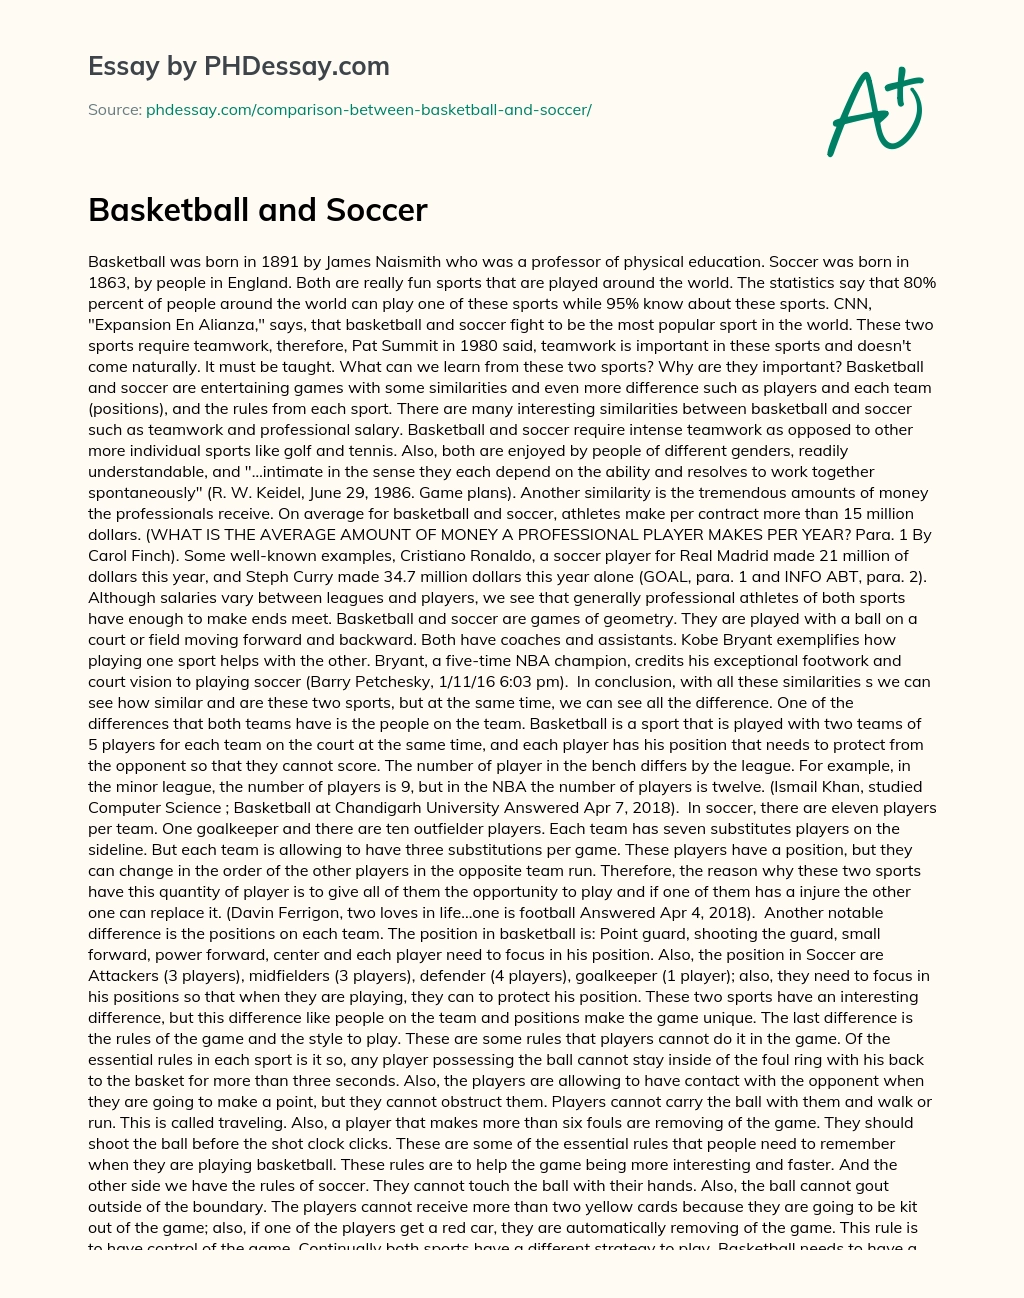 Basketball and Soccer essay